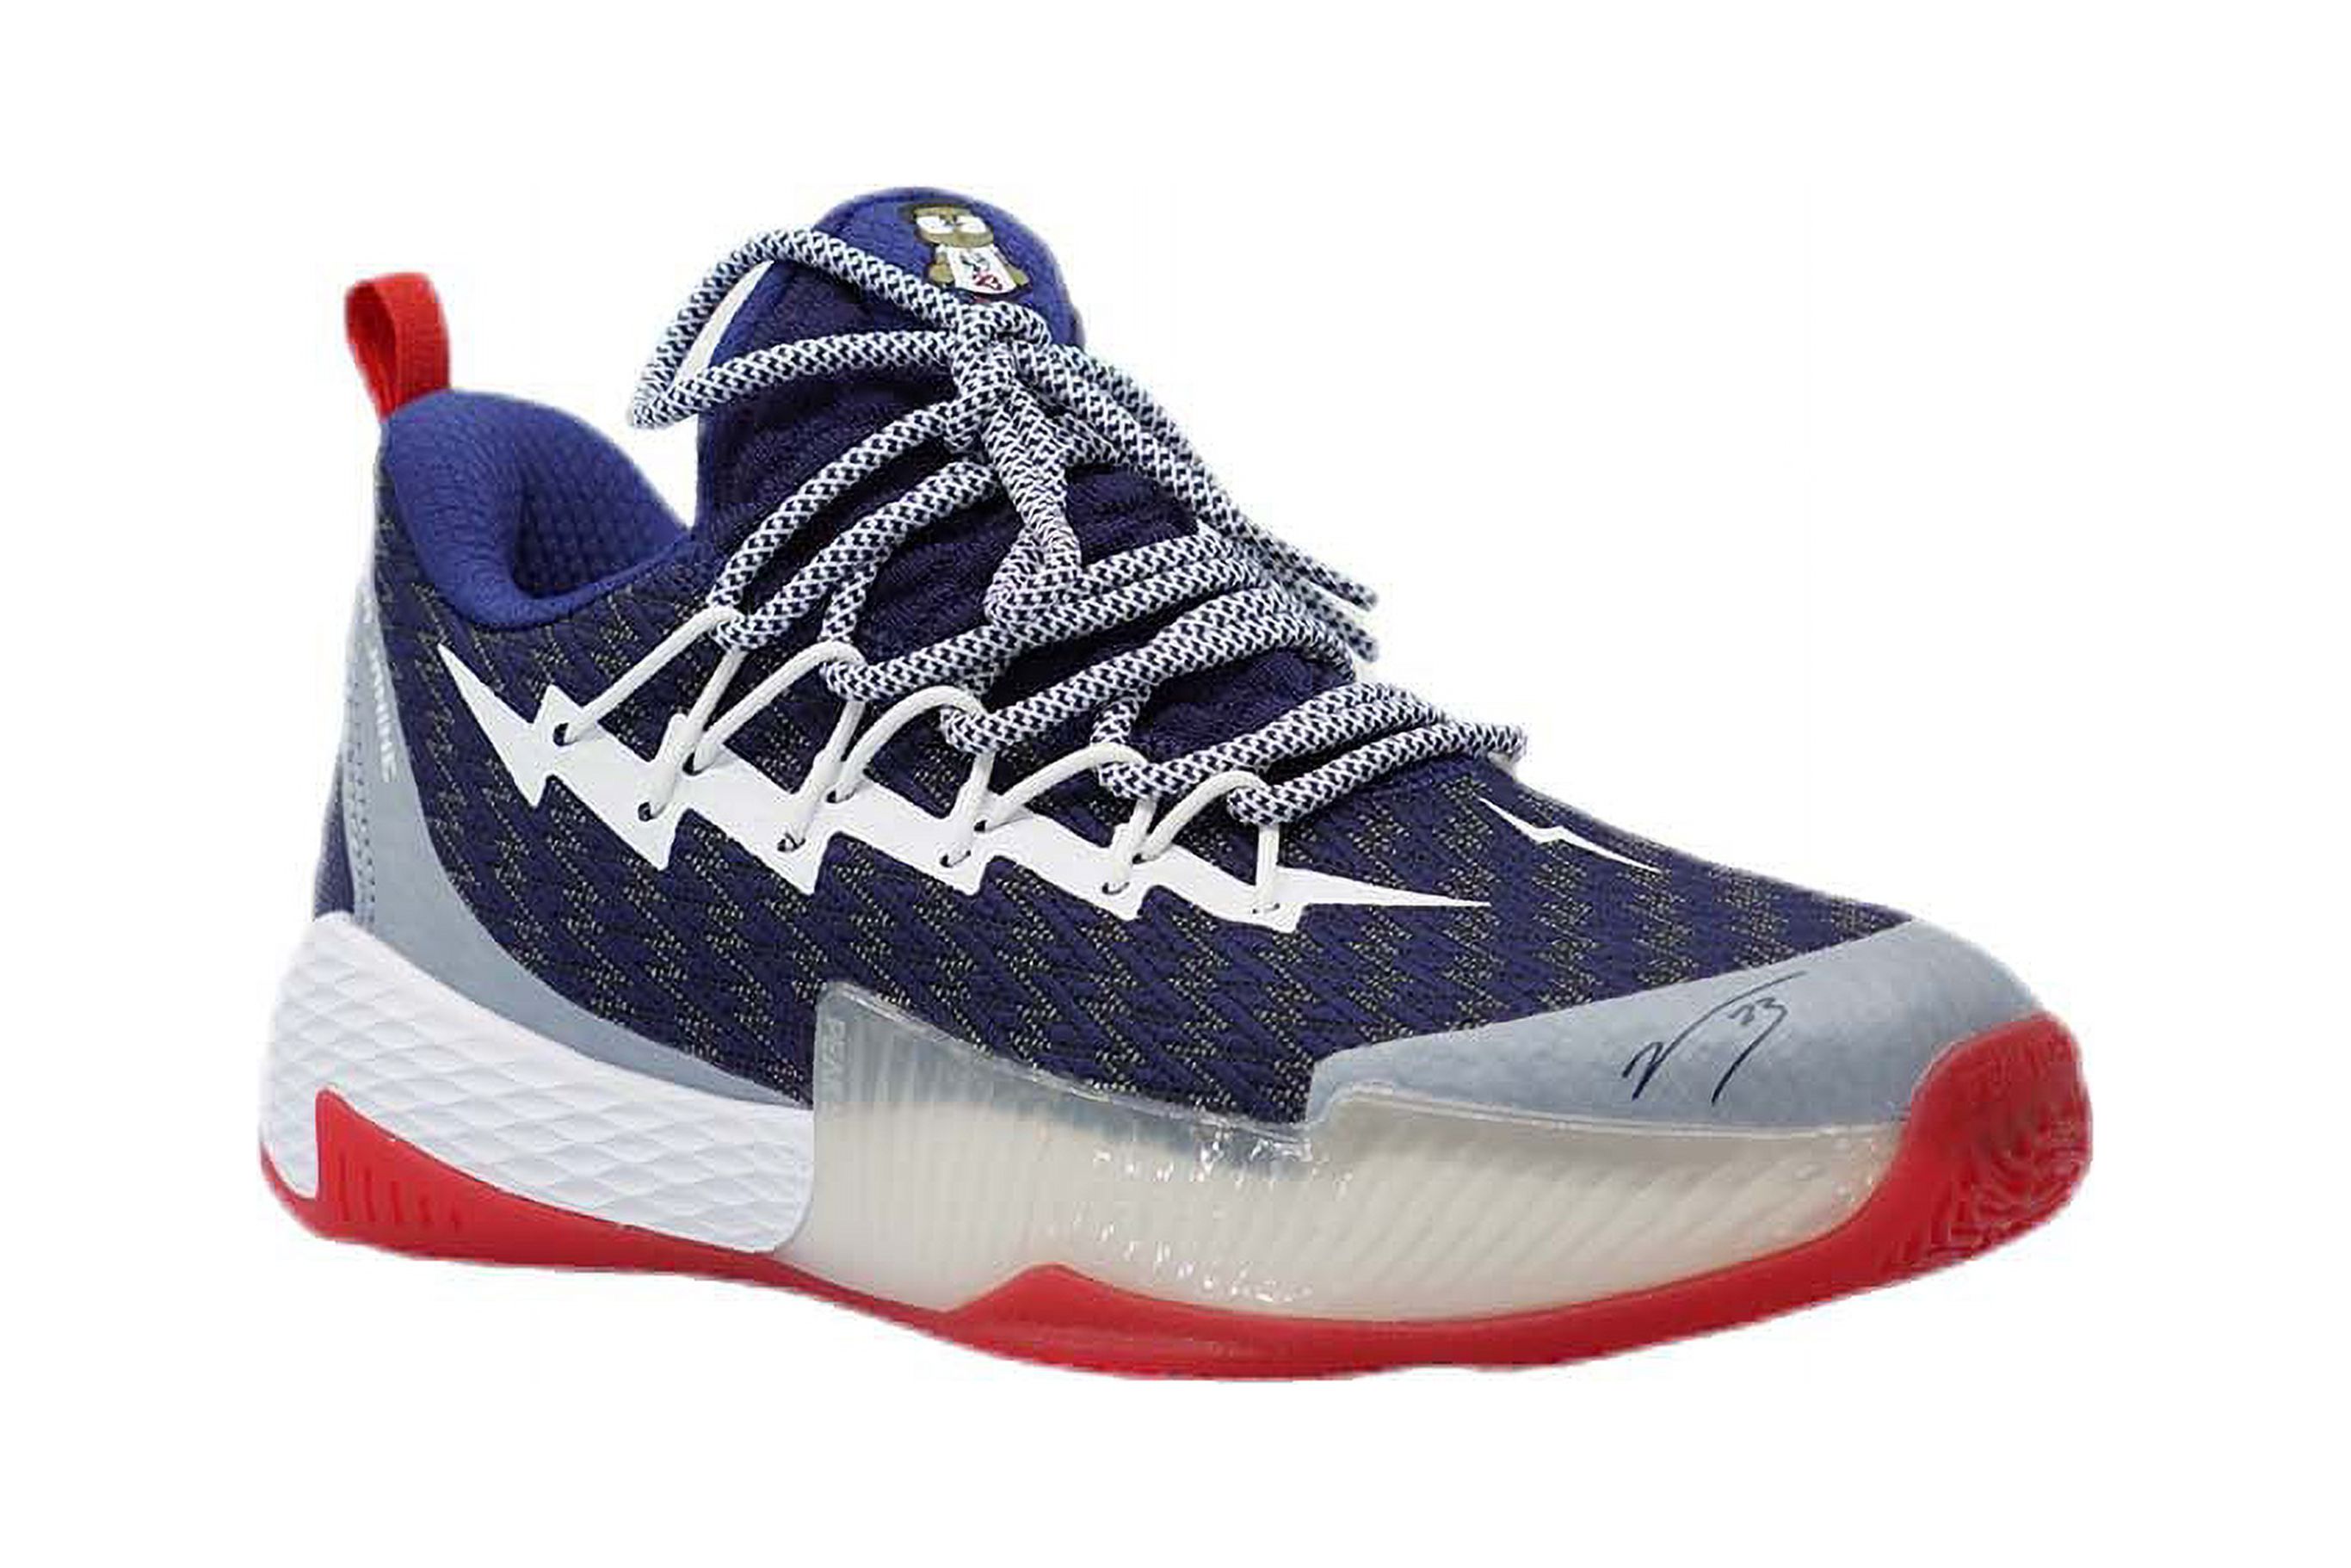 [E91351] Mens Peak Crazy 6 Lou Williams Signature Navy Red Silver Basketball Shoes - 12 - image 5 of 72